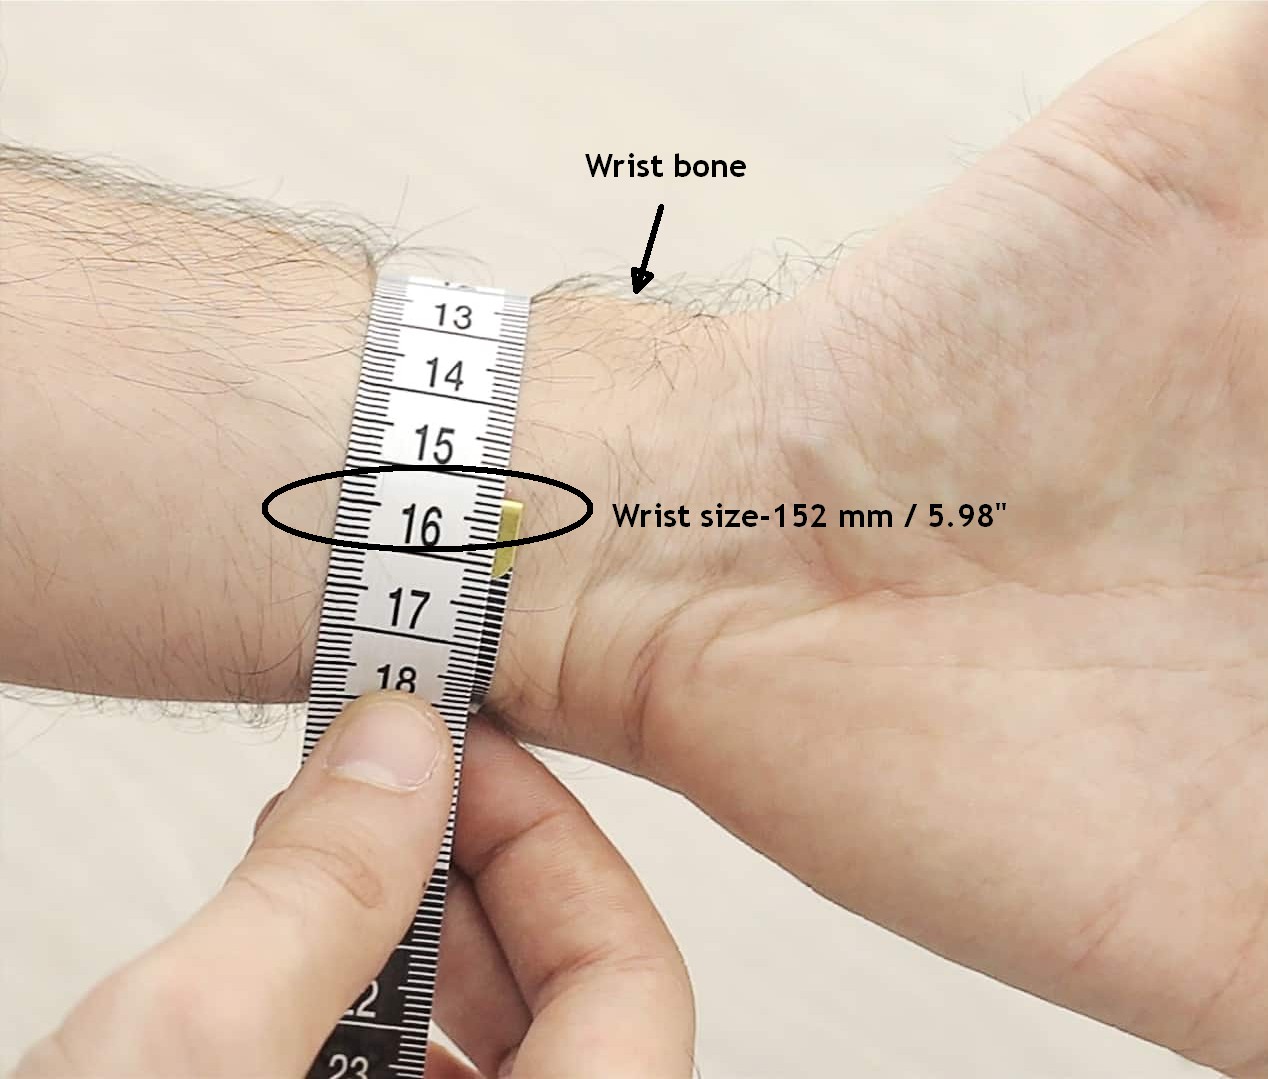 how to measure wrist circumference - the most accurate way